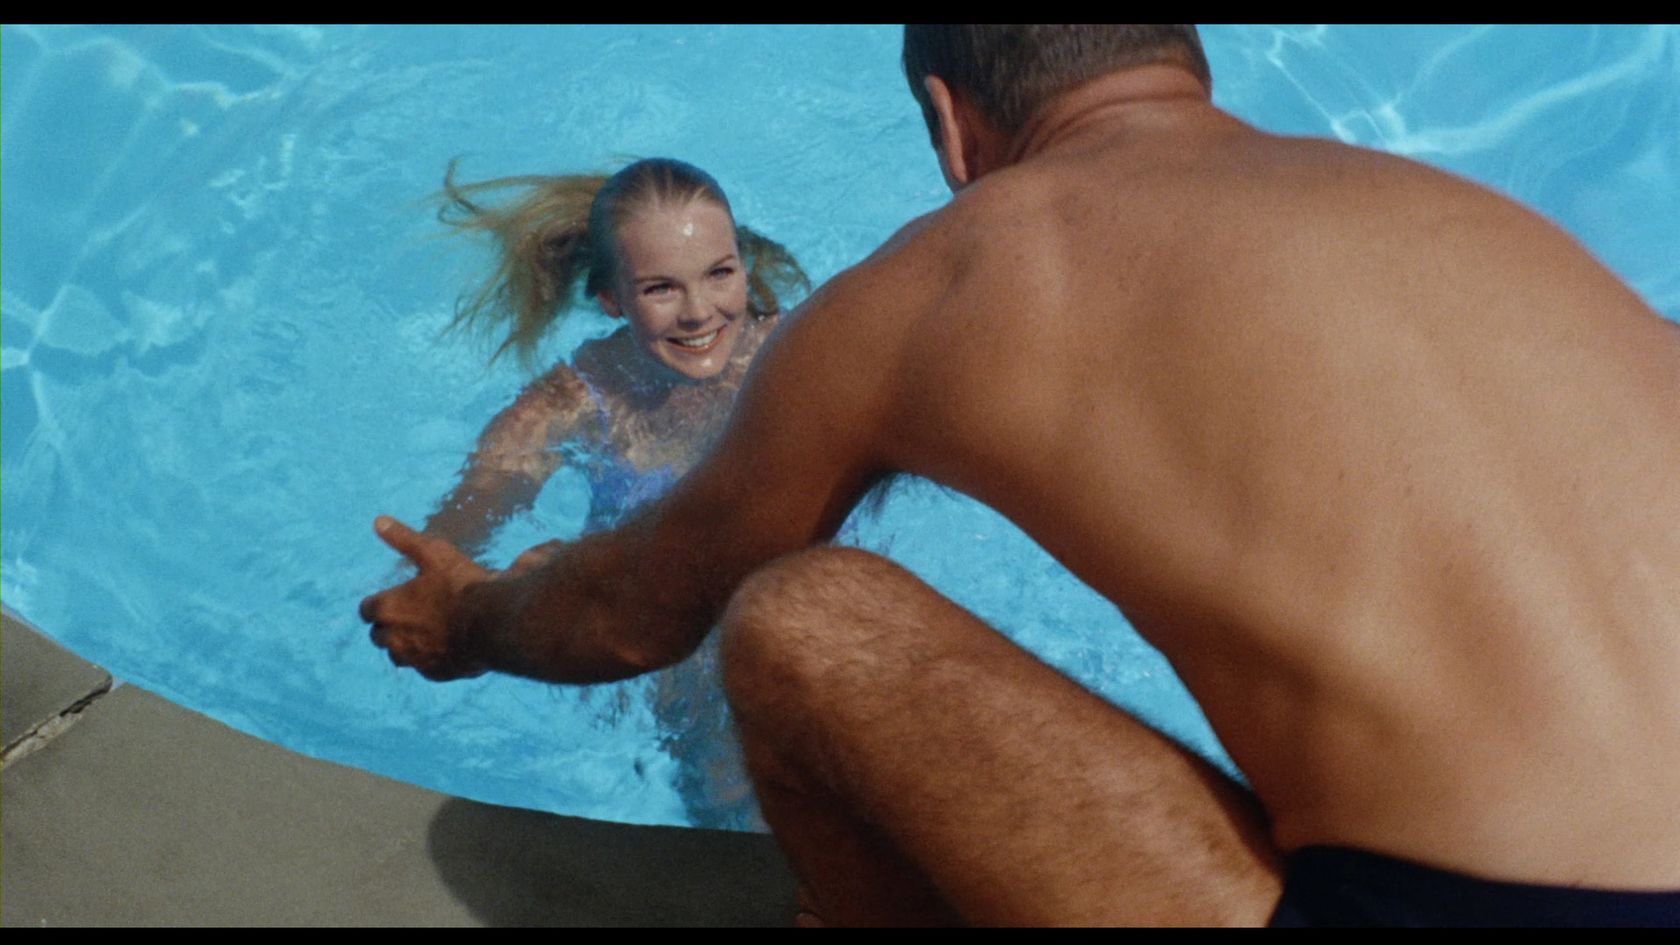 The swimmer | 